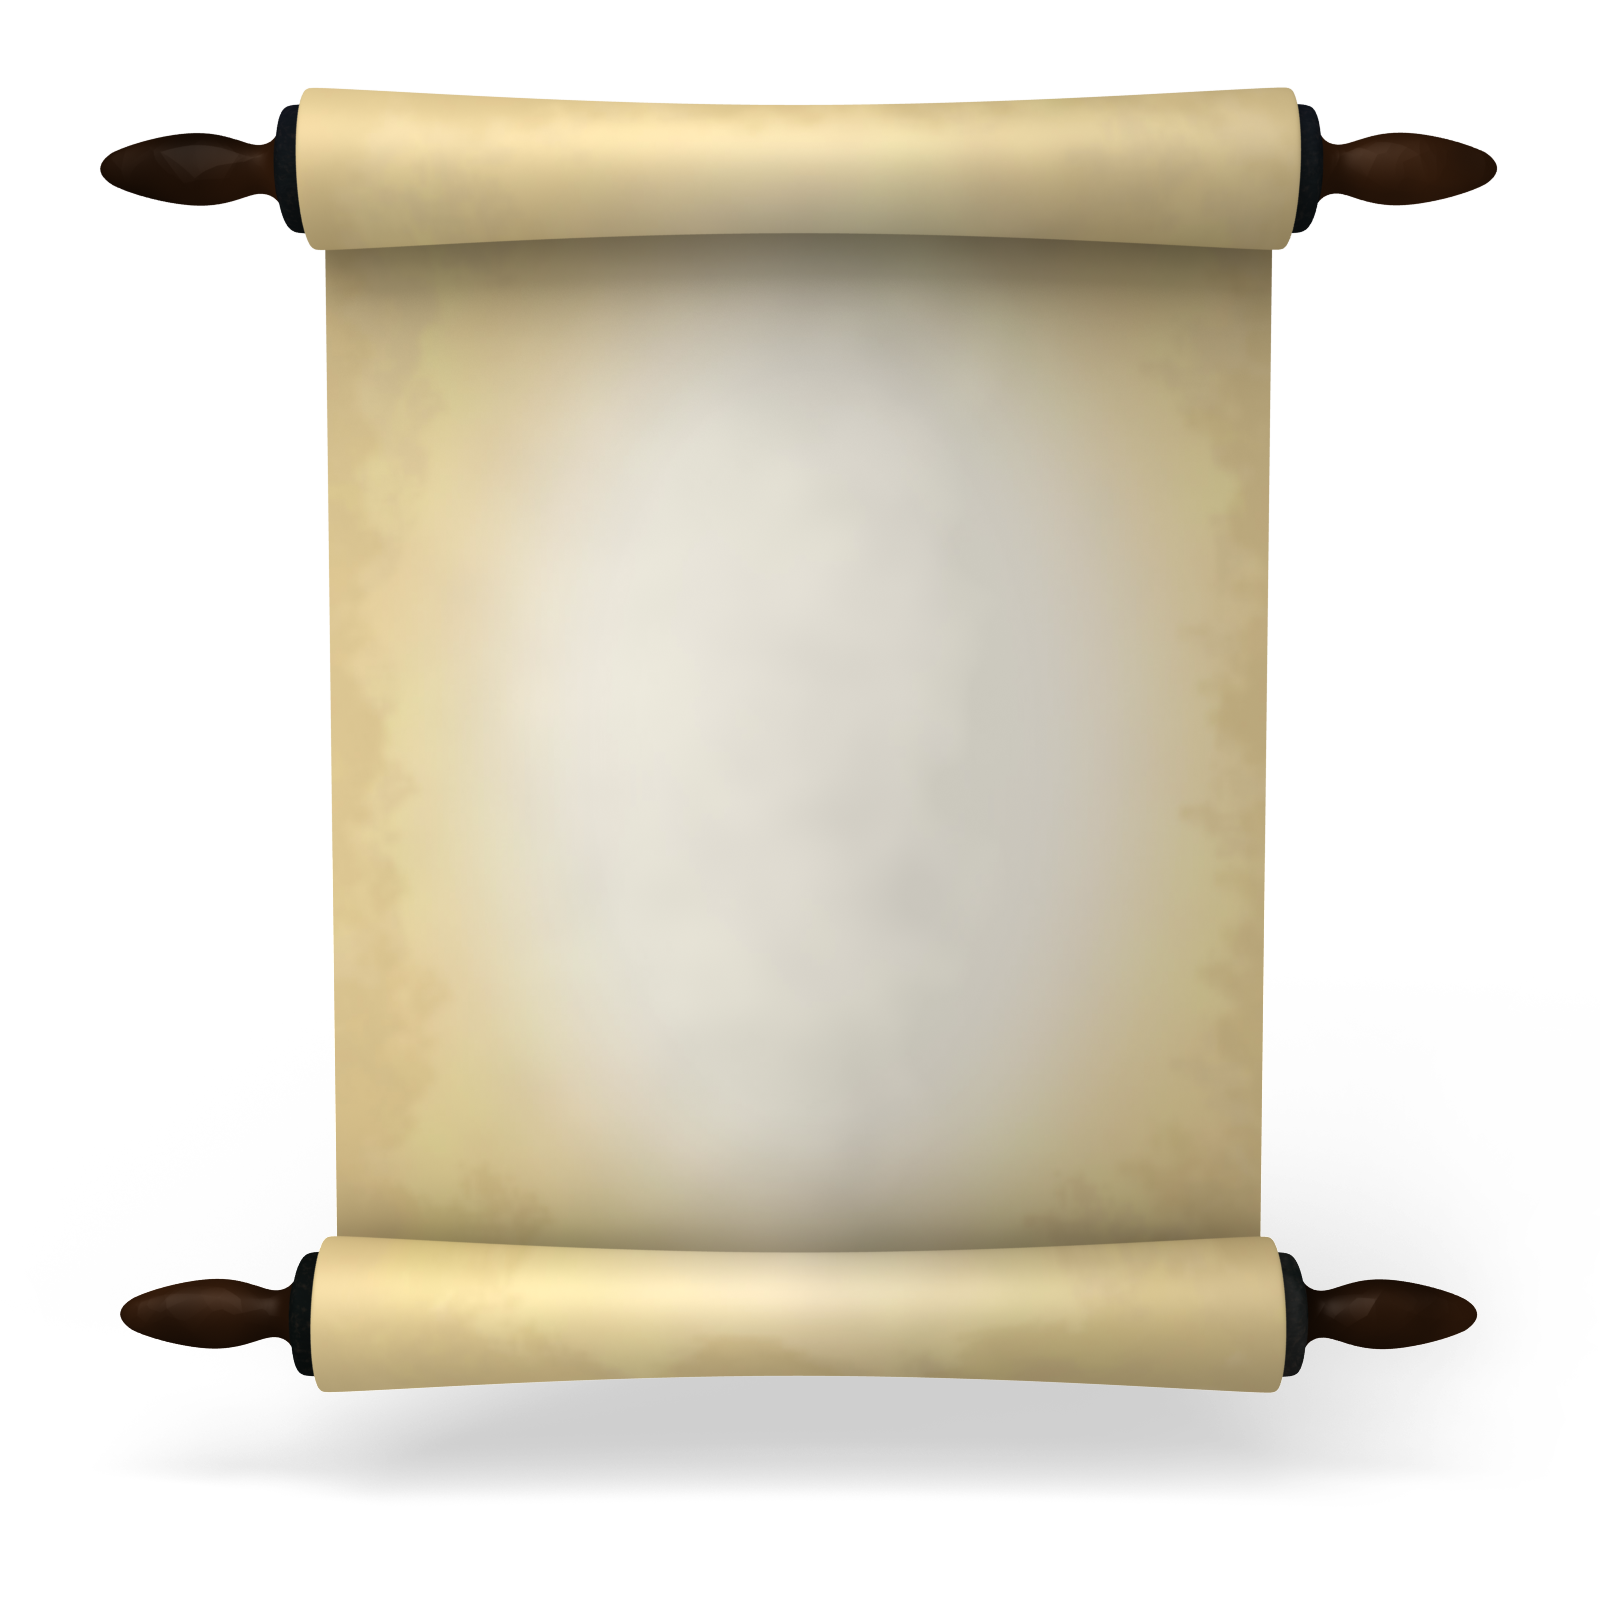 Ancient Letter Roll Png - Ancient Scroll Paper   Clipart Best, Transparent background PNG HD thumbnail